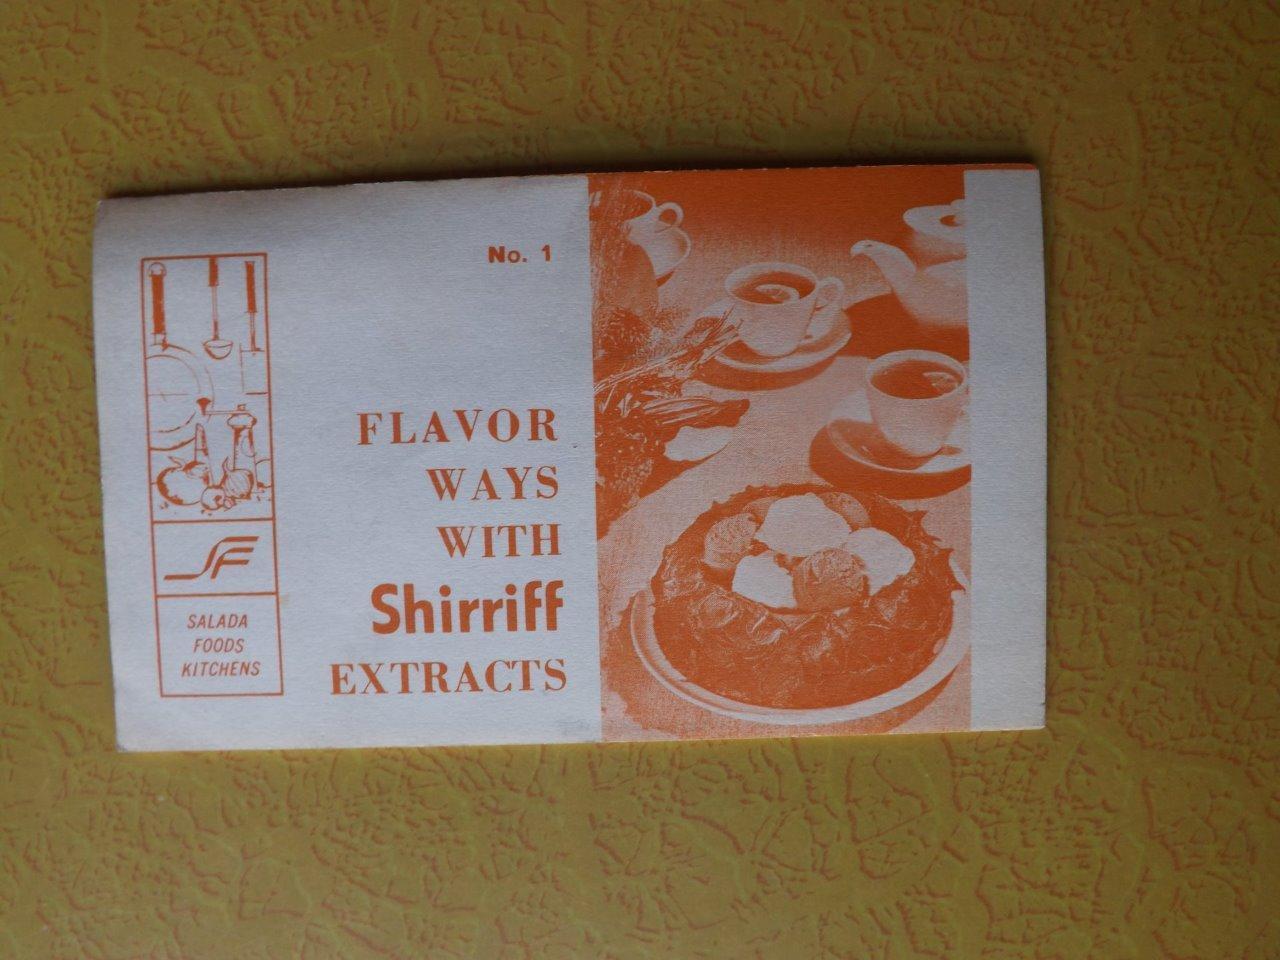 RECIPE FOLD OUT FLYER FLAVOR WAYS WITH SHERRIFF EXTRACTS SALADA FOODS KITCHENS